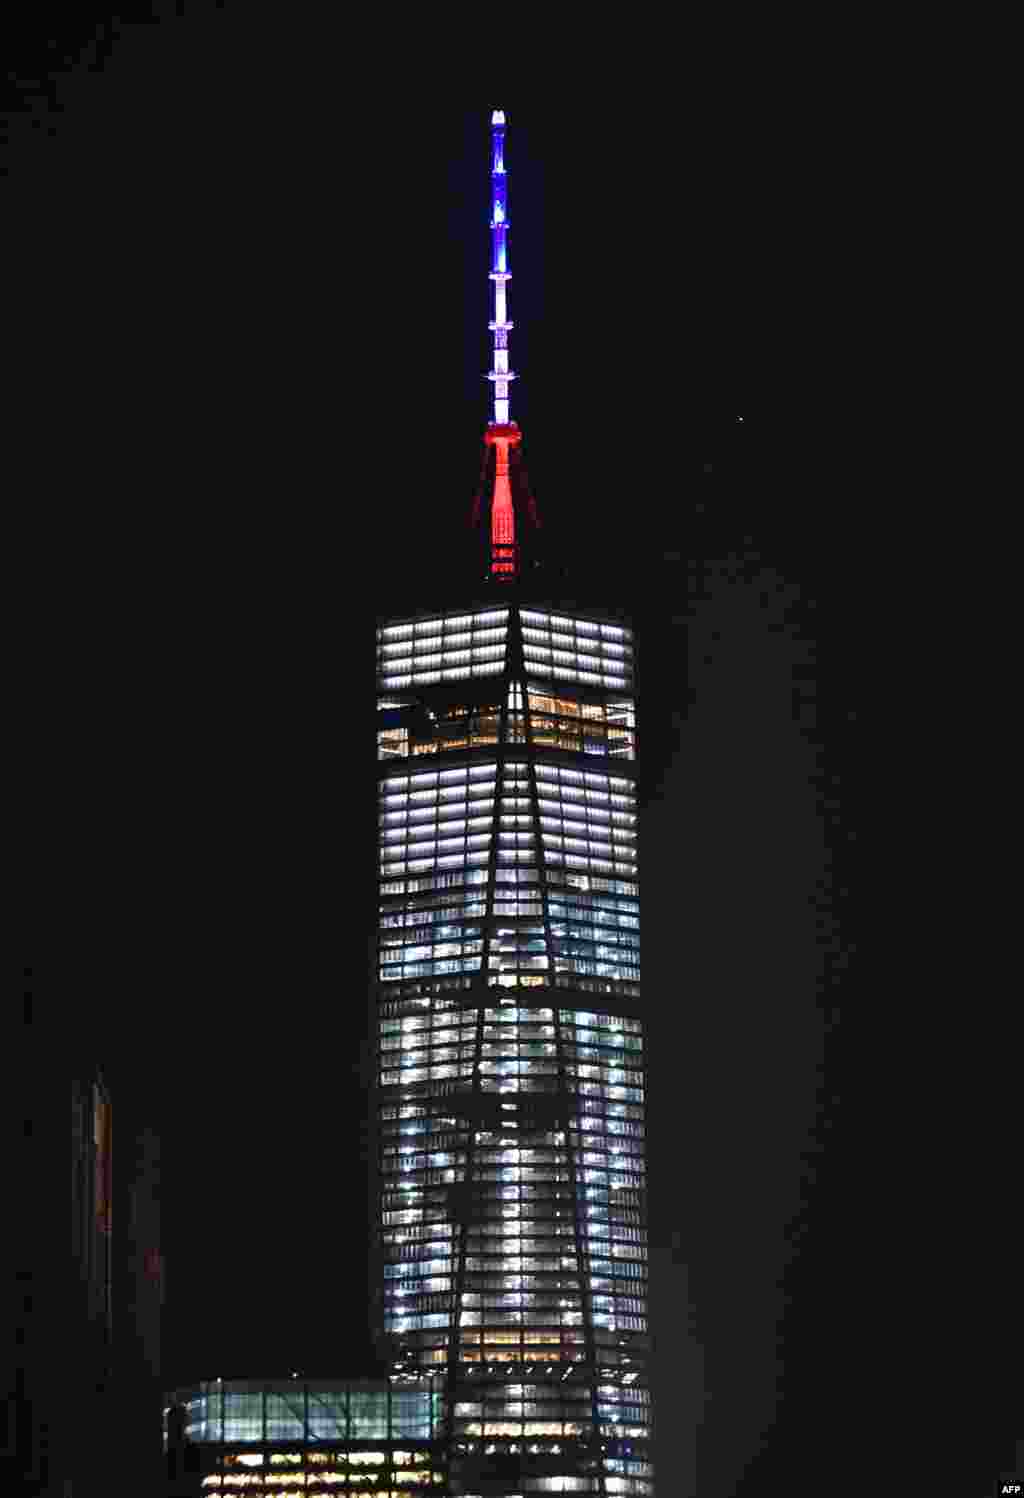 Red, white, and blue colors at the top of the tower of One World Trade Center in New York.